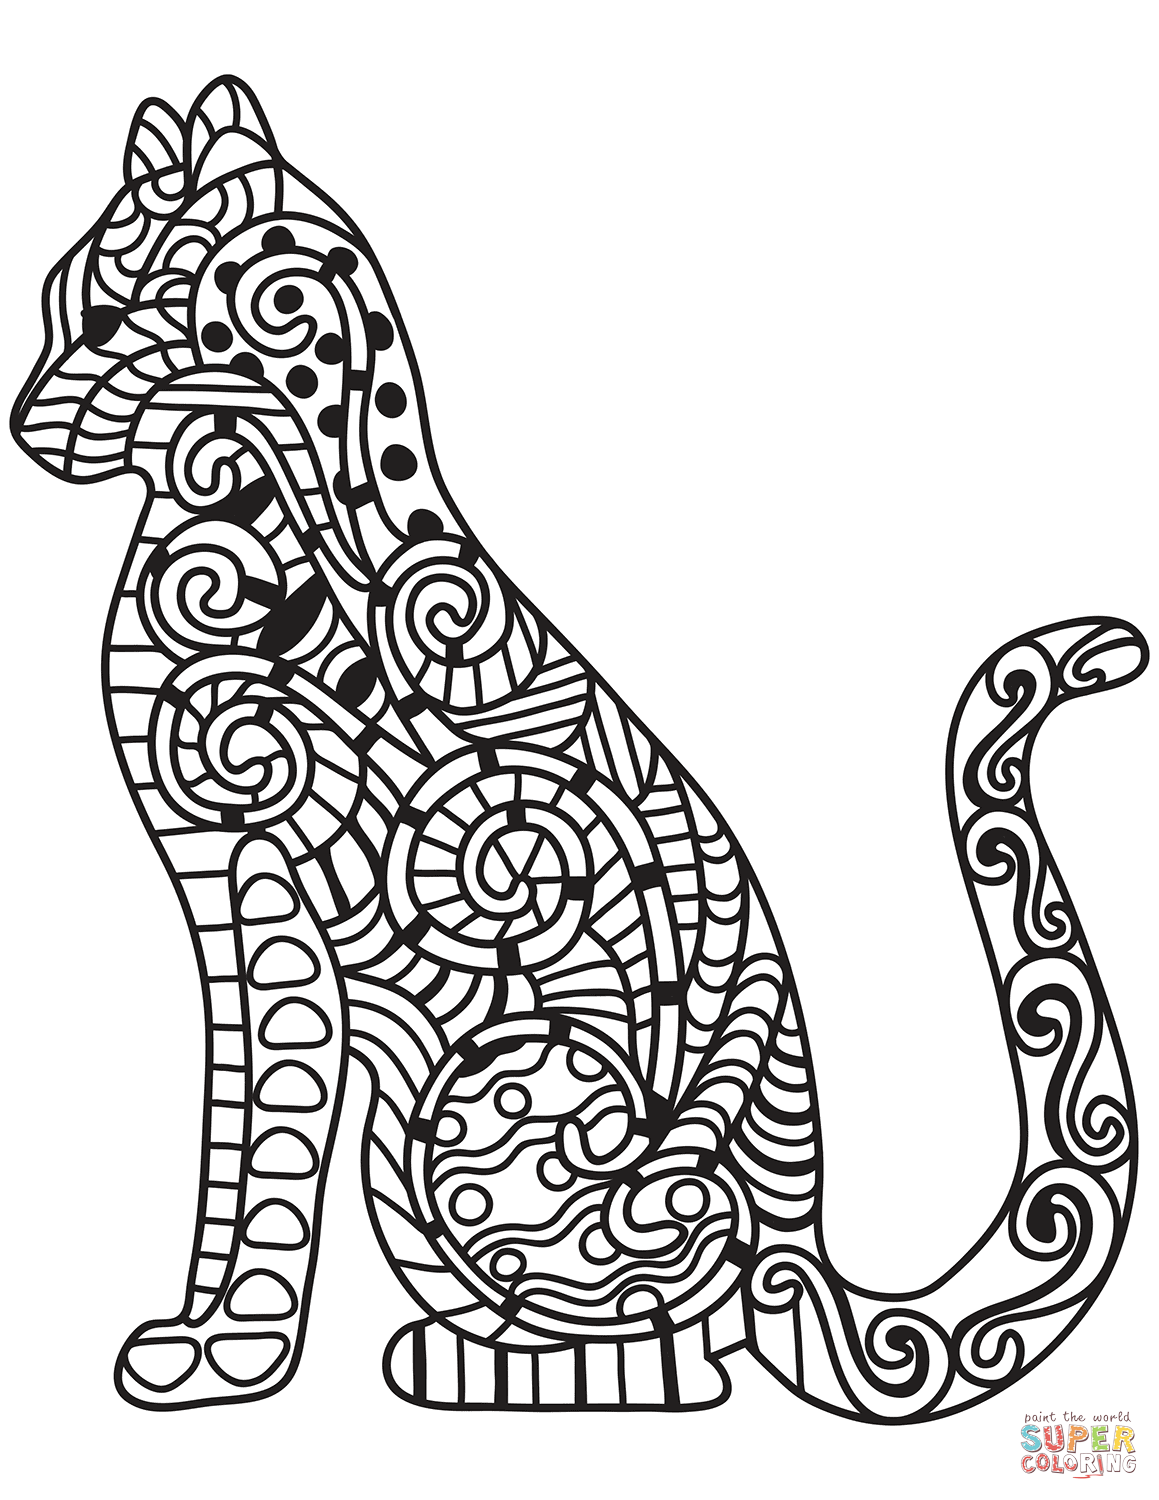 Zentangle Cat coloring page | Free Printable Coloring Pages | Cat coloring  page, Mermaid coloring pages, Free printable coloring pages